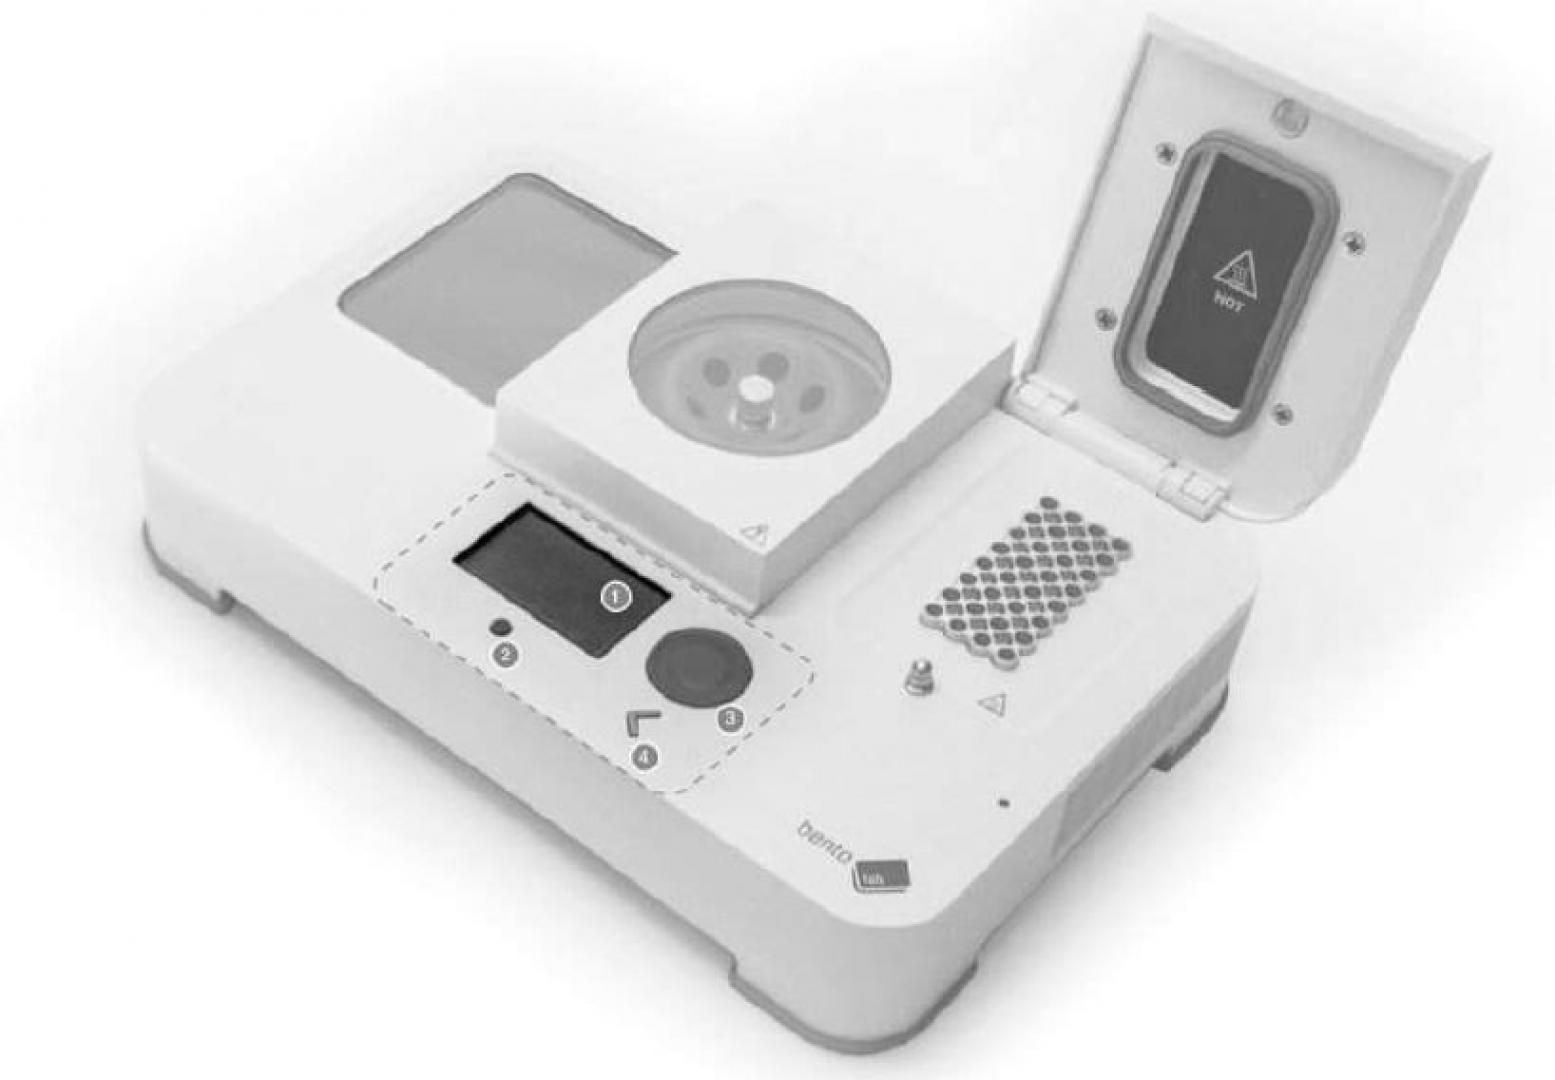 Portable PCR device for on site detection of pathogens